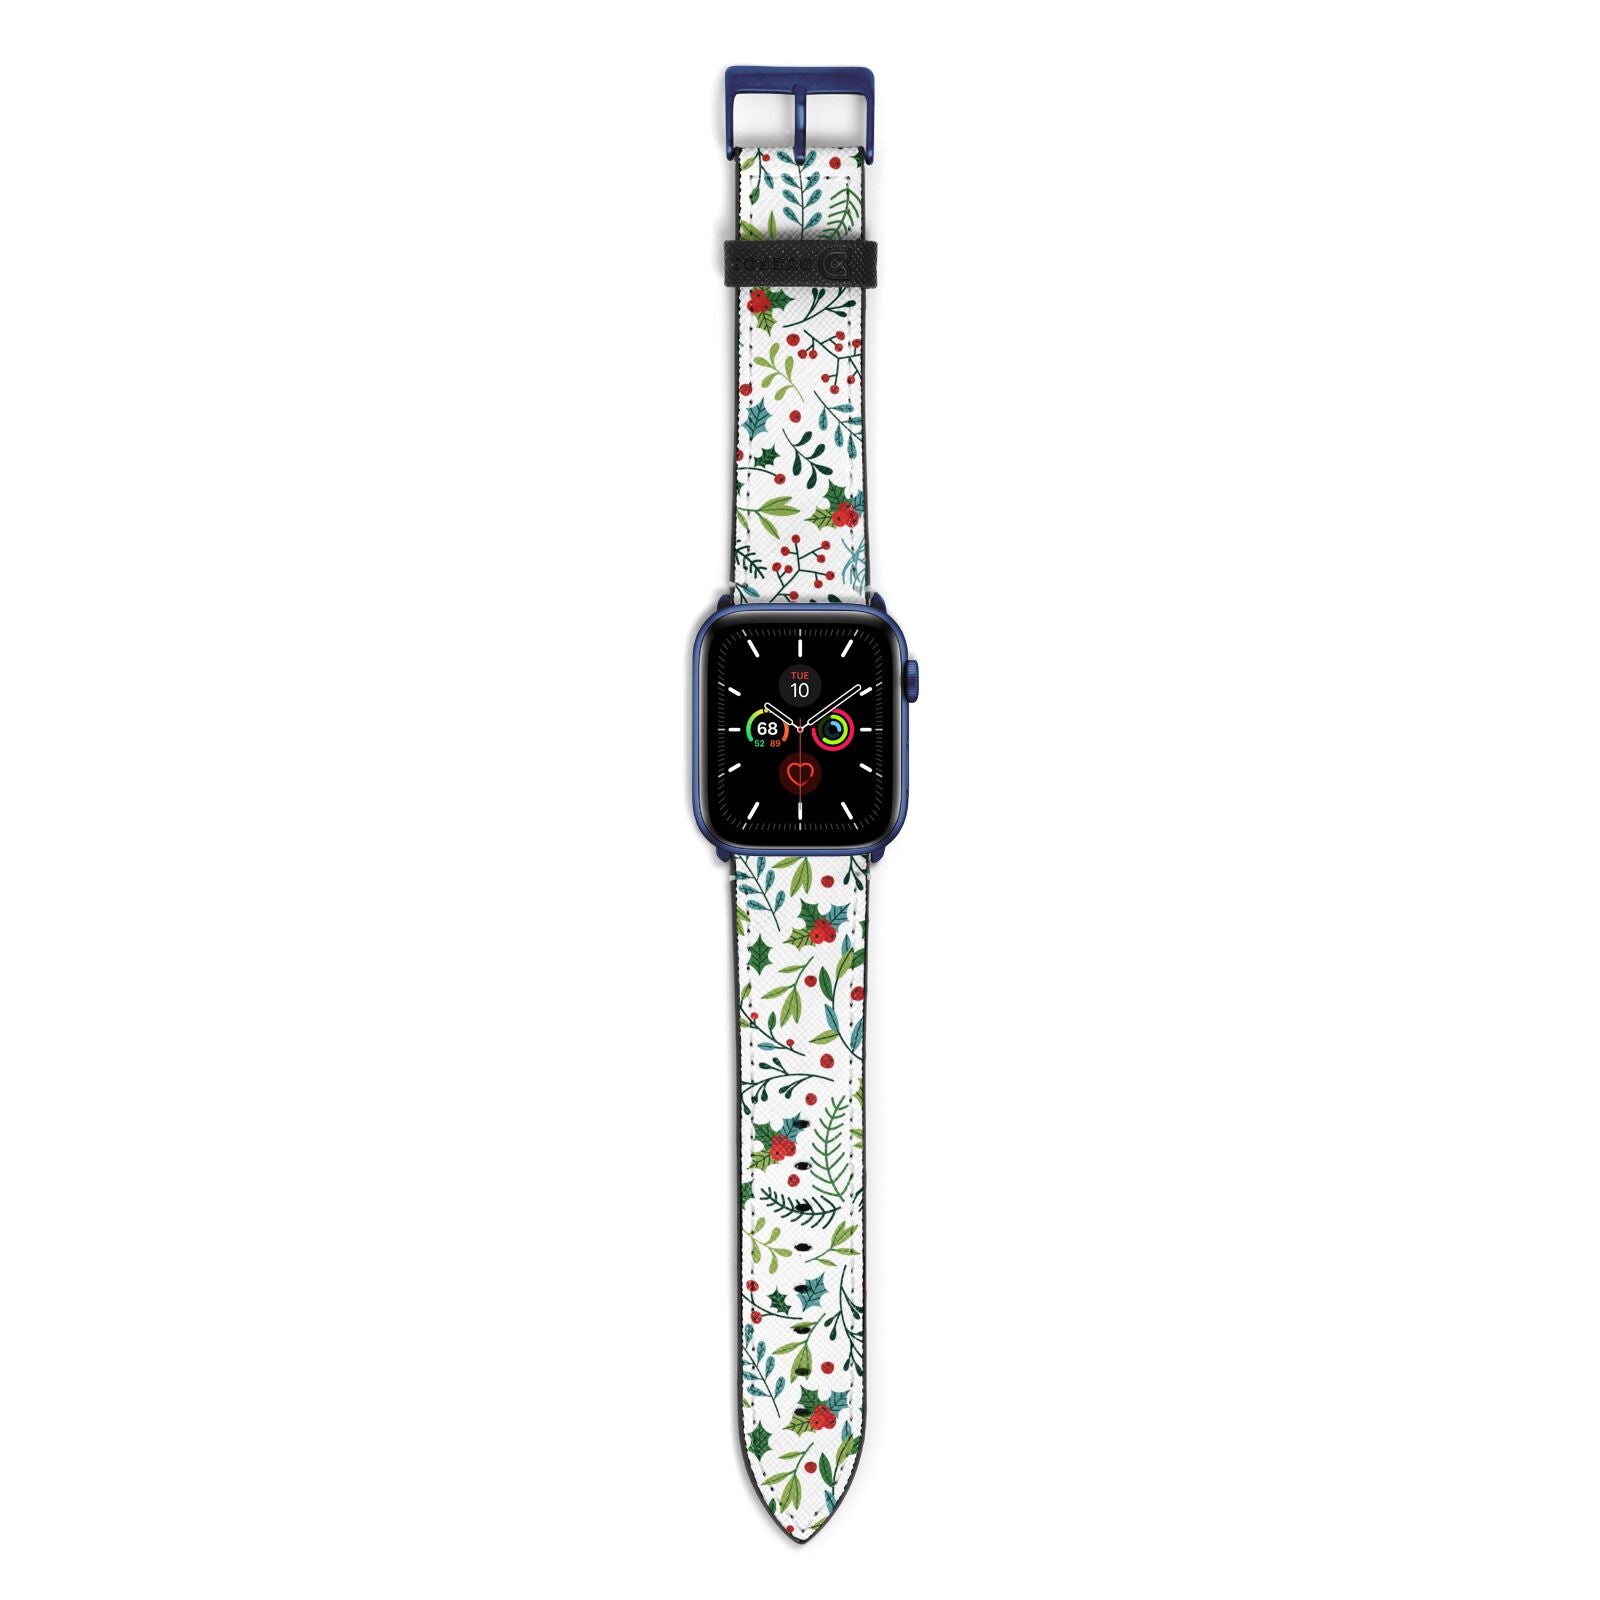 Winter Floral Apple Watch Strap with Blue Hardware